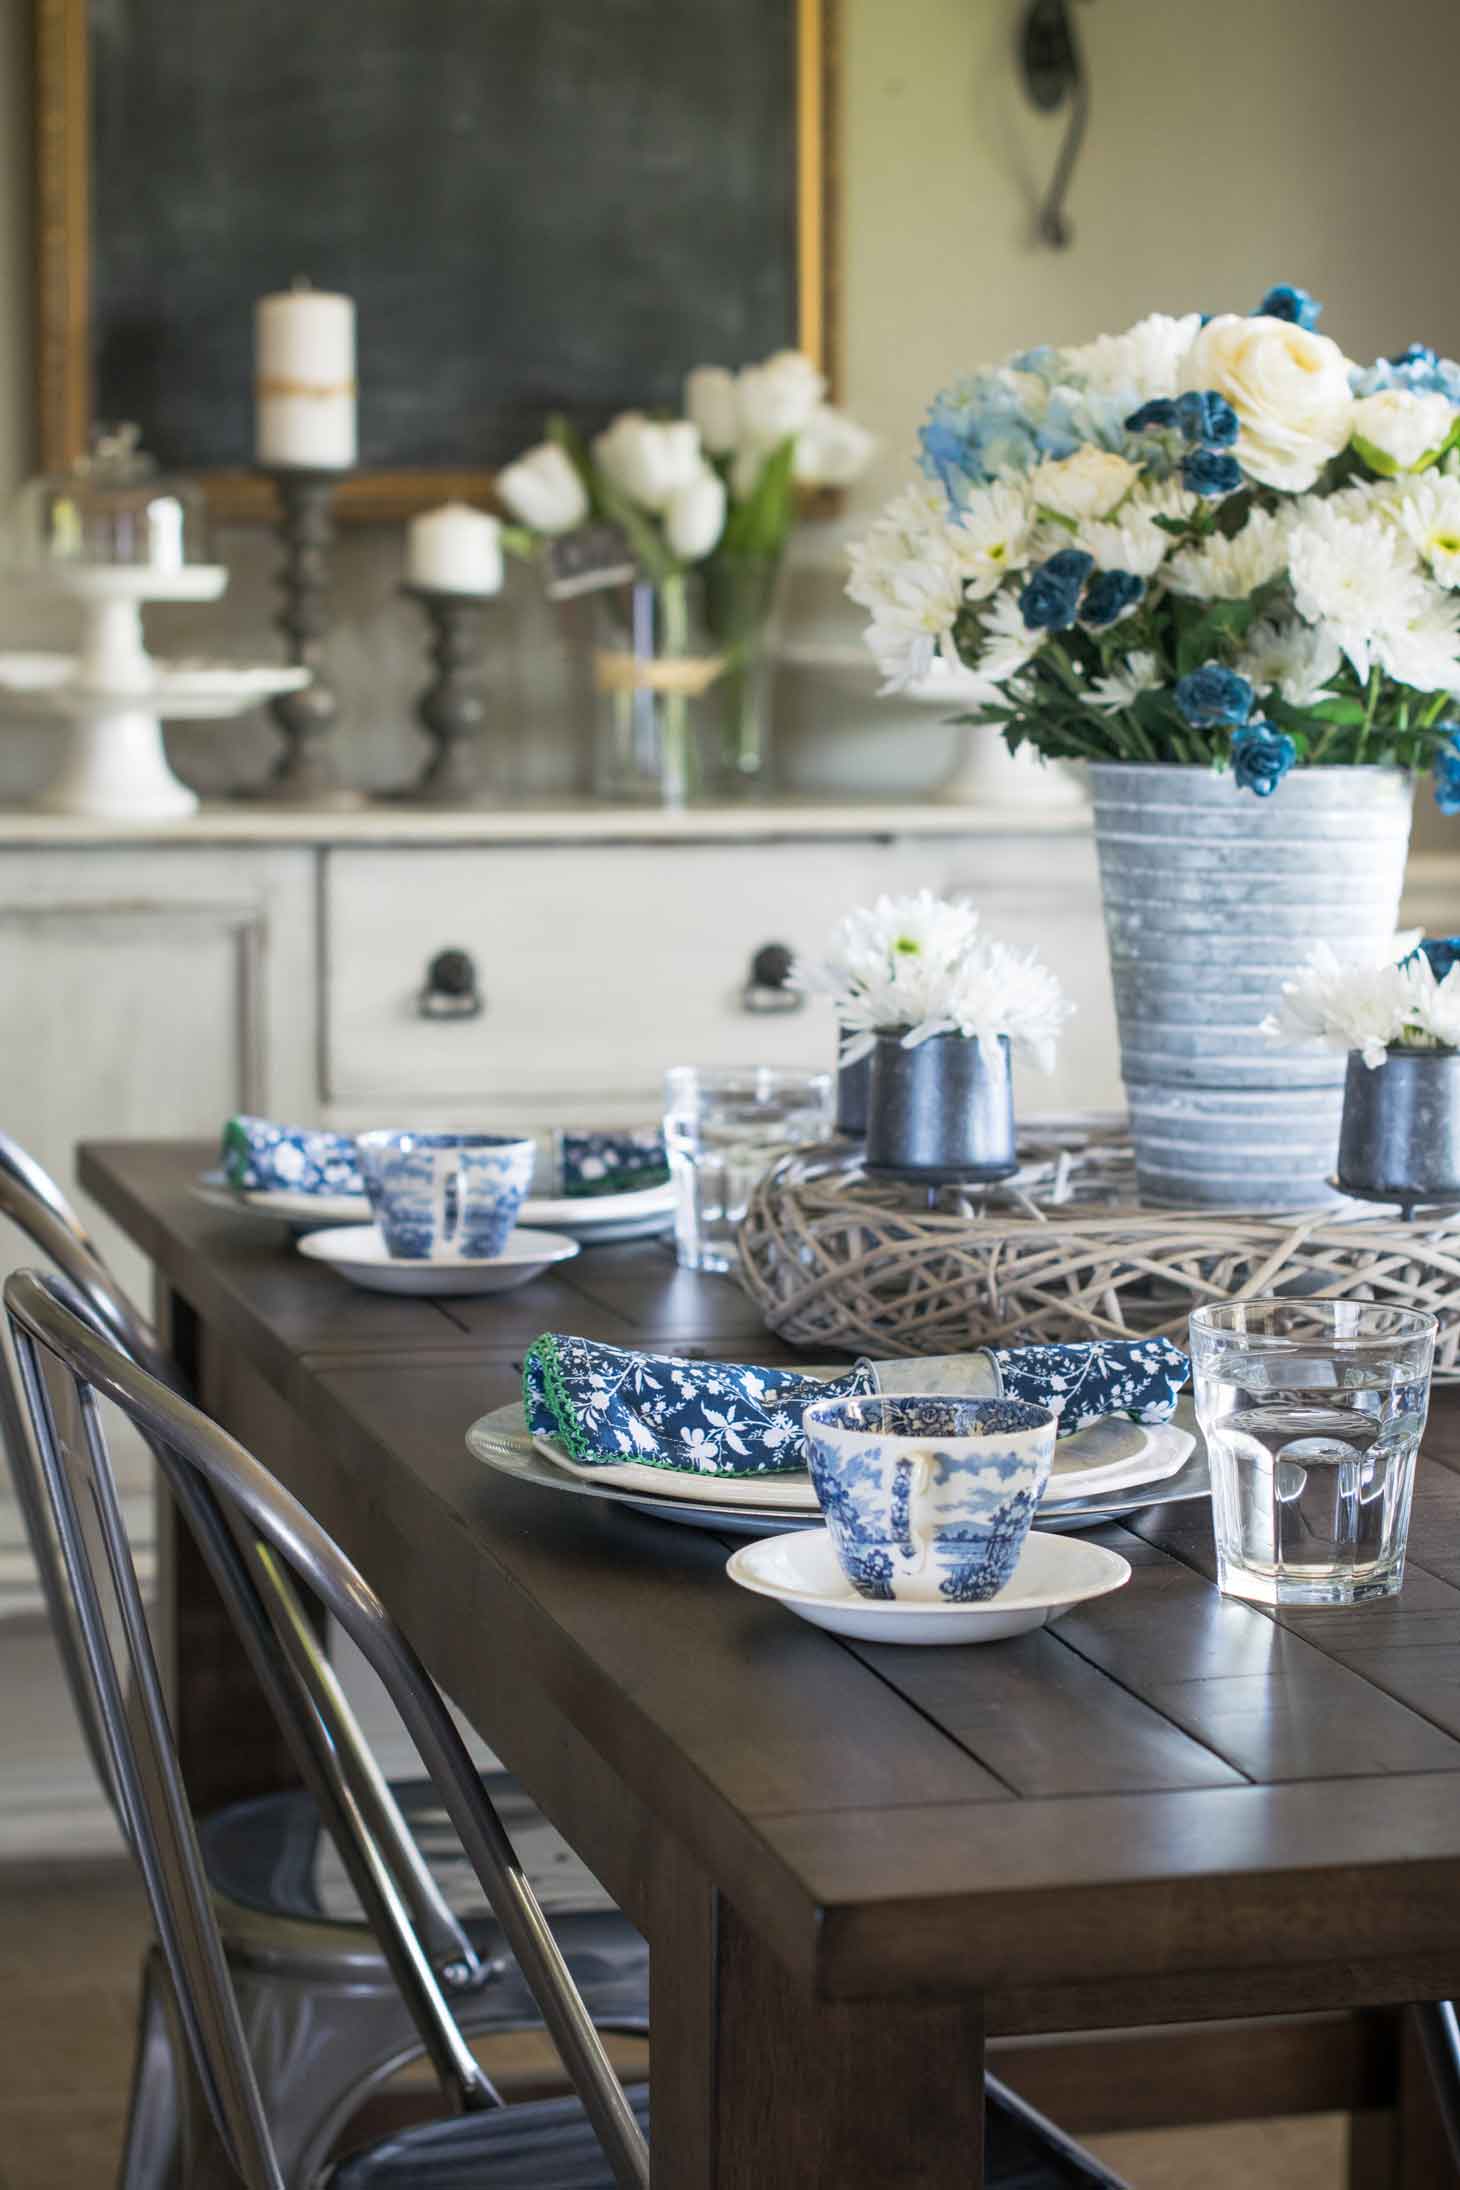 This blue and white china spring tablescape is sure to wow your guests on Easter and beyond. It utilizes antique blue and white antique ironstone as well as modern napkins and a fresh floral centerpiece.